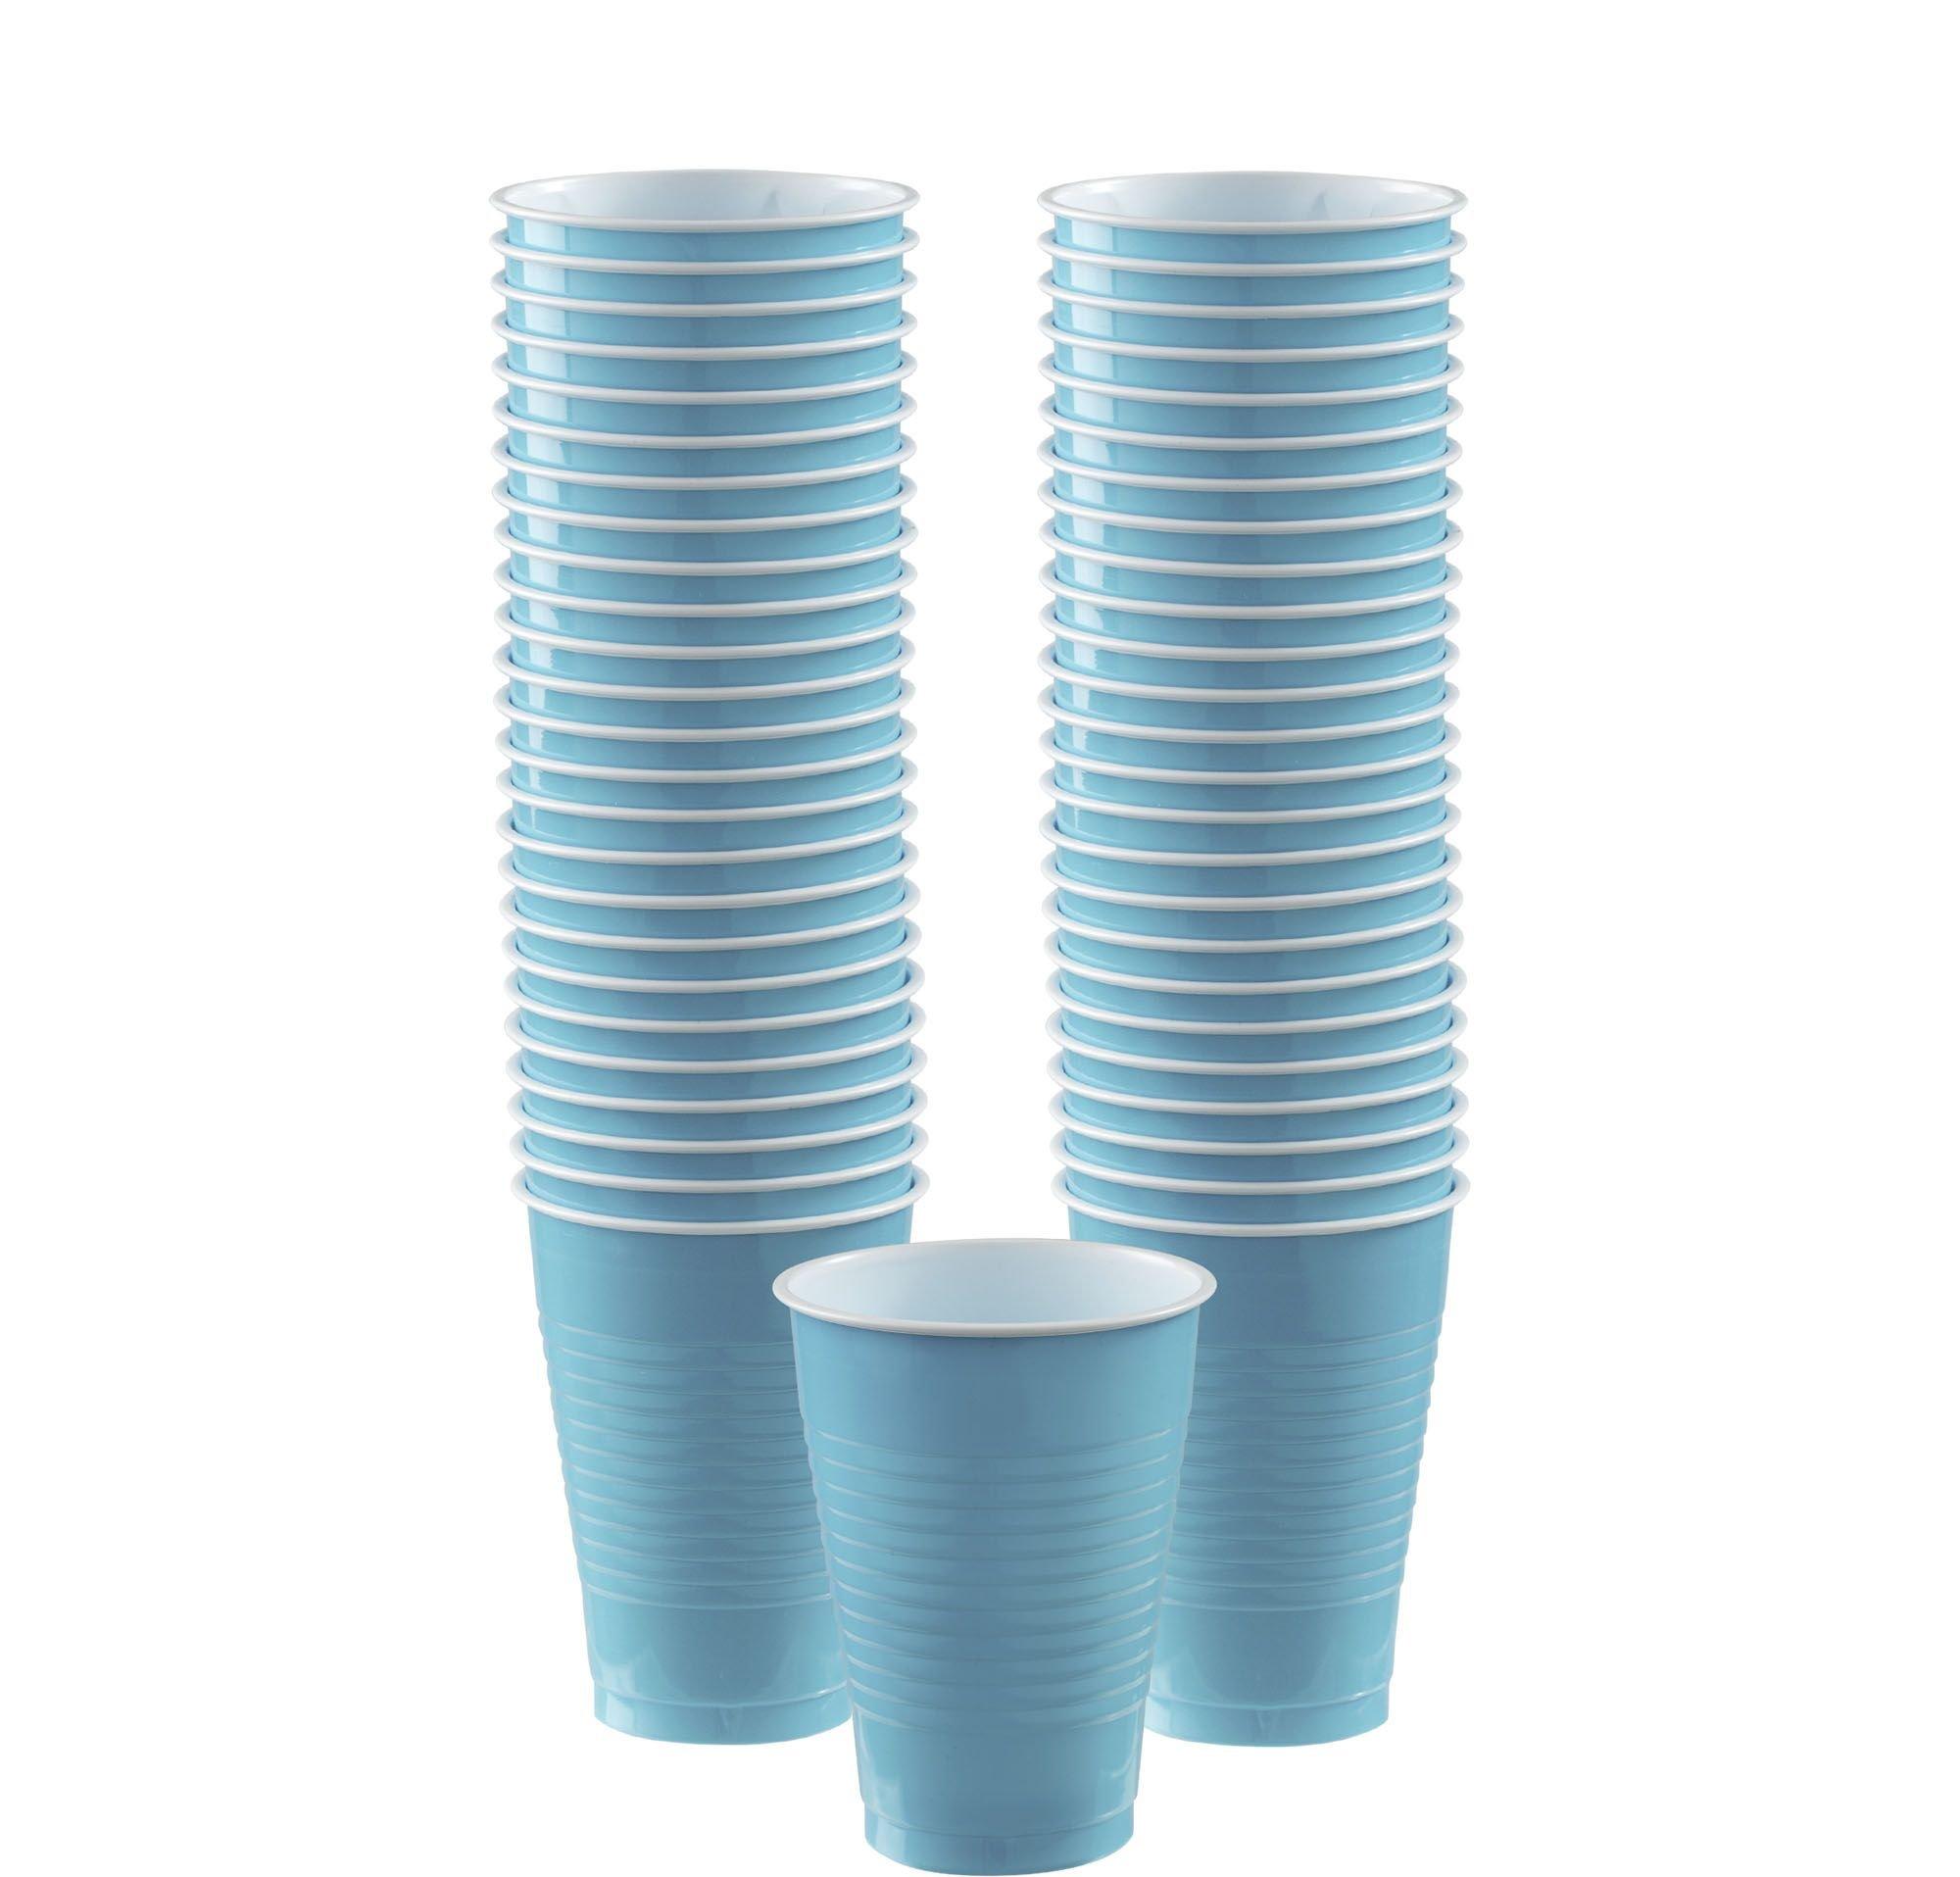 Party Dimensions 82233 30 Count Plastic Cup, 12-Ounce, Blue